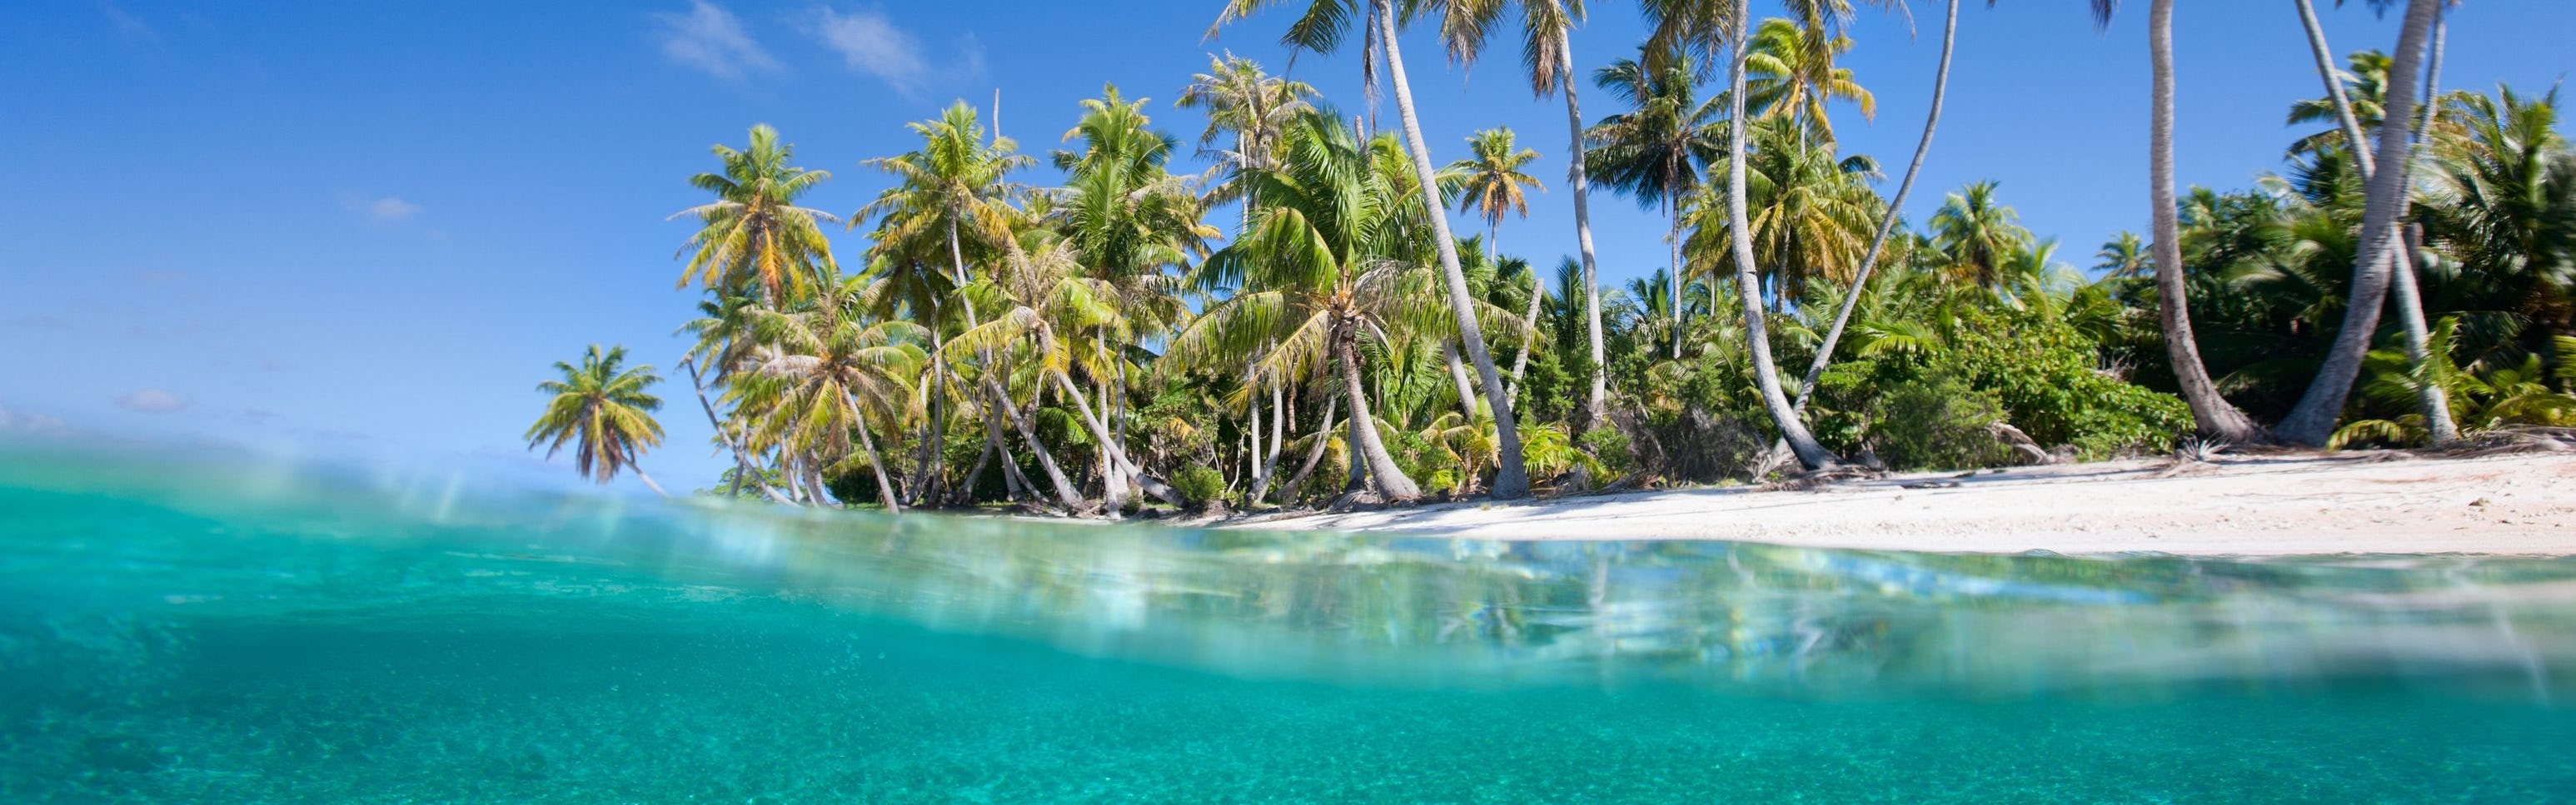 a person scuba diving in clear ocean water and palm trees in the backgroun